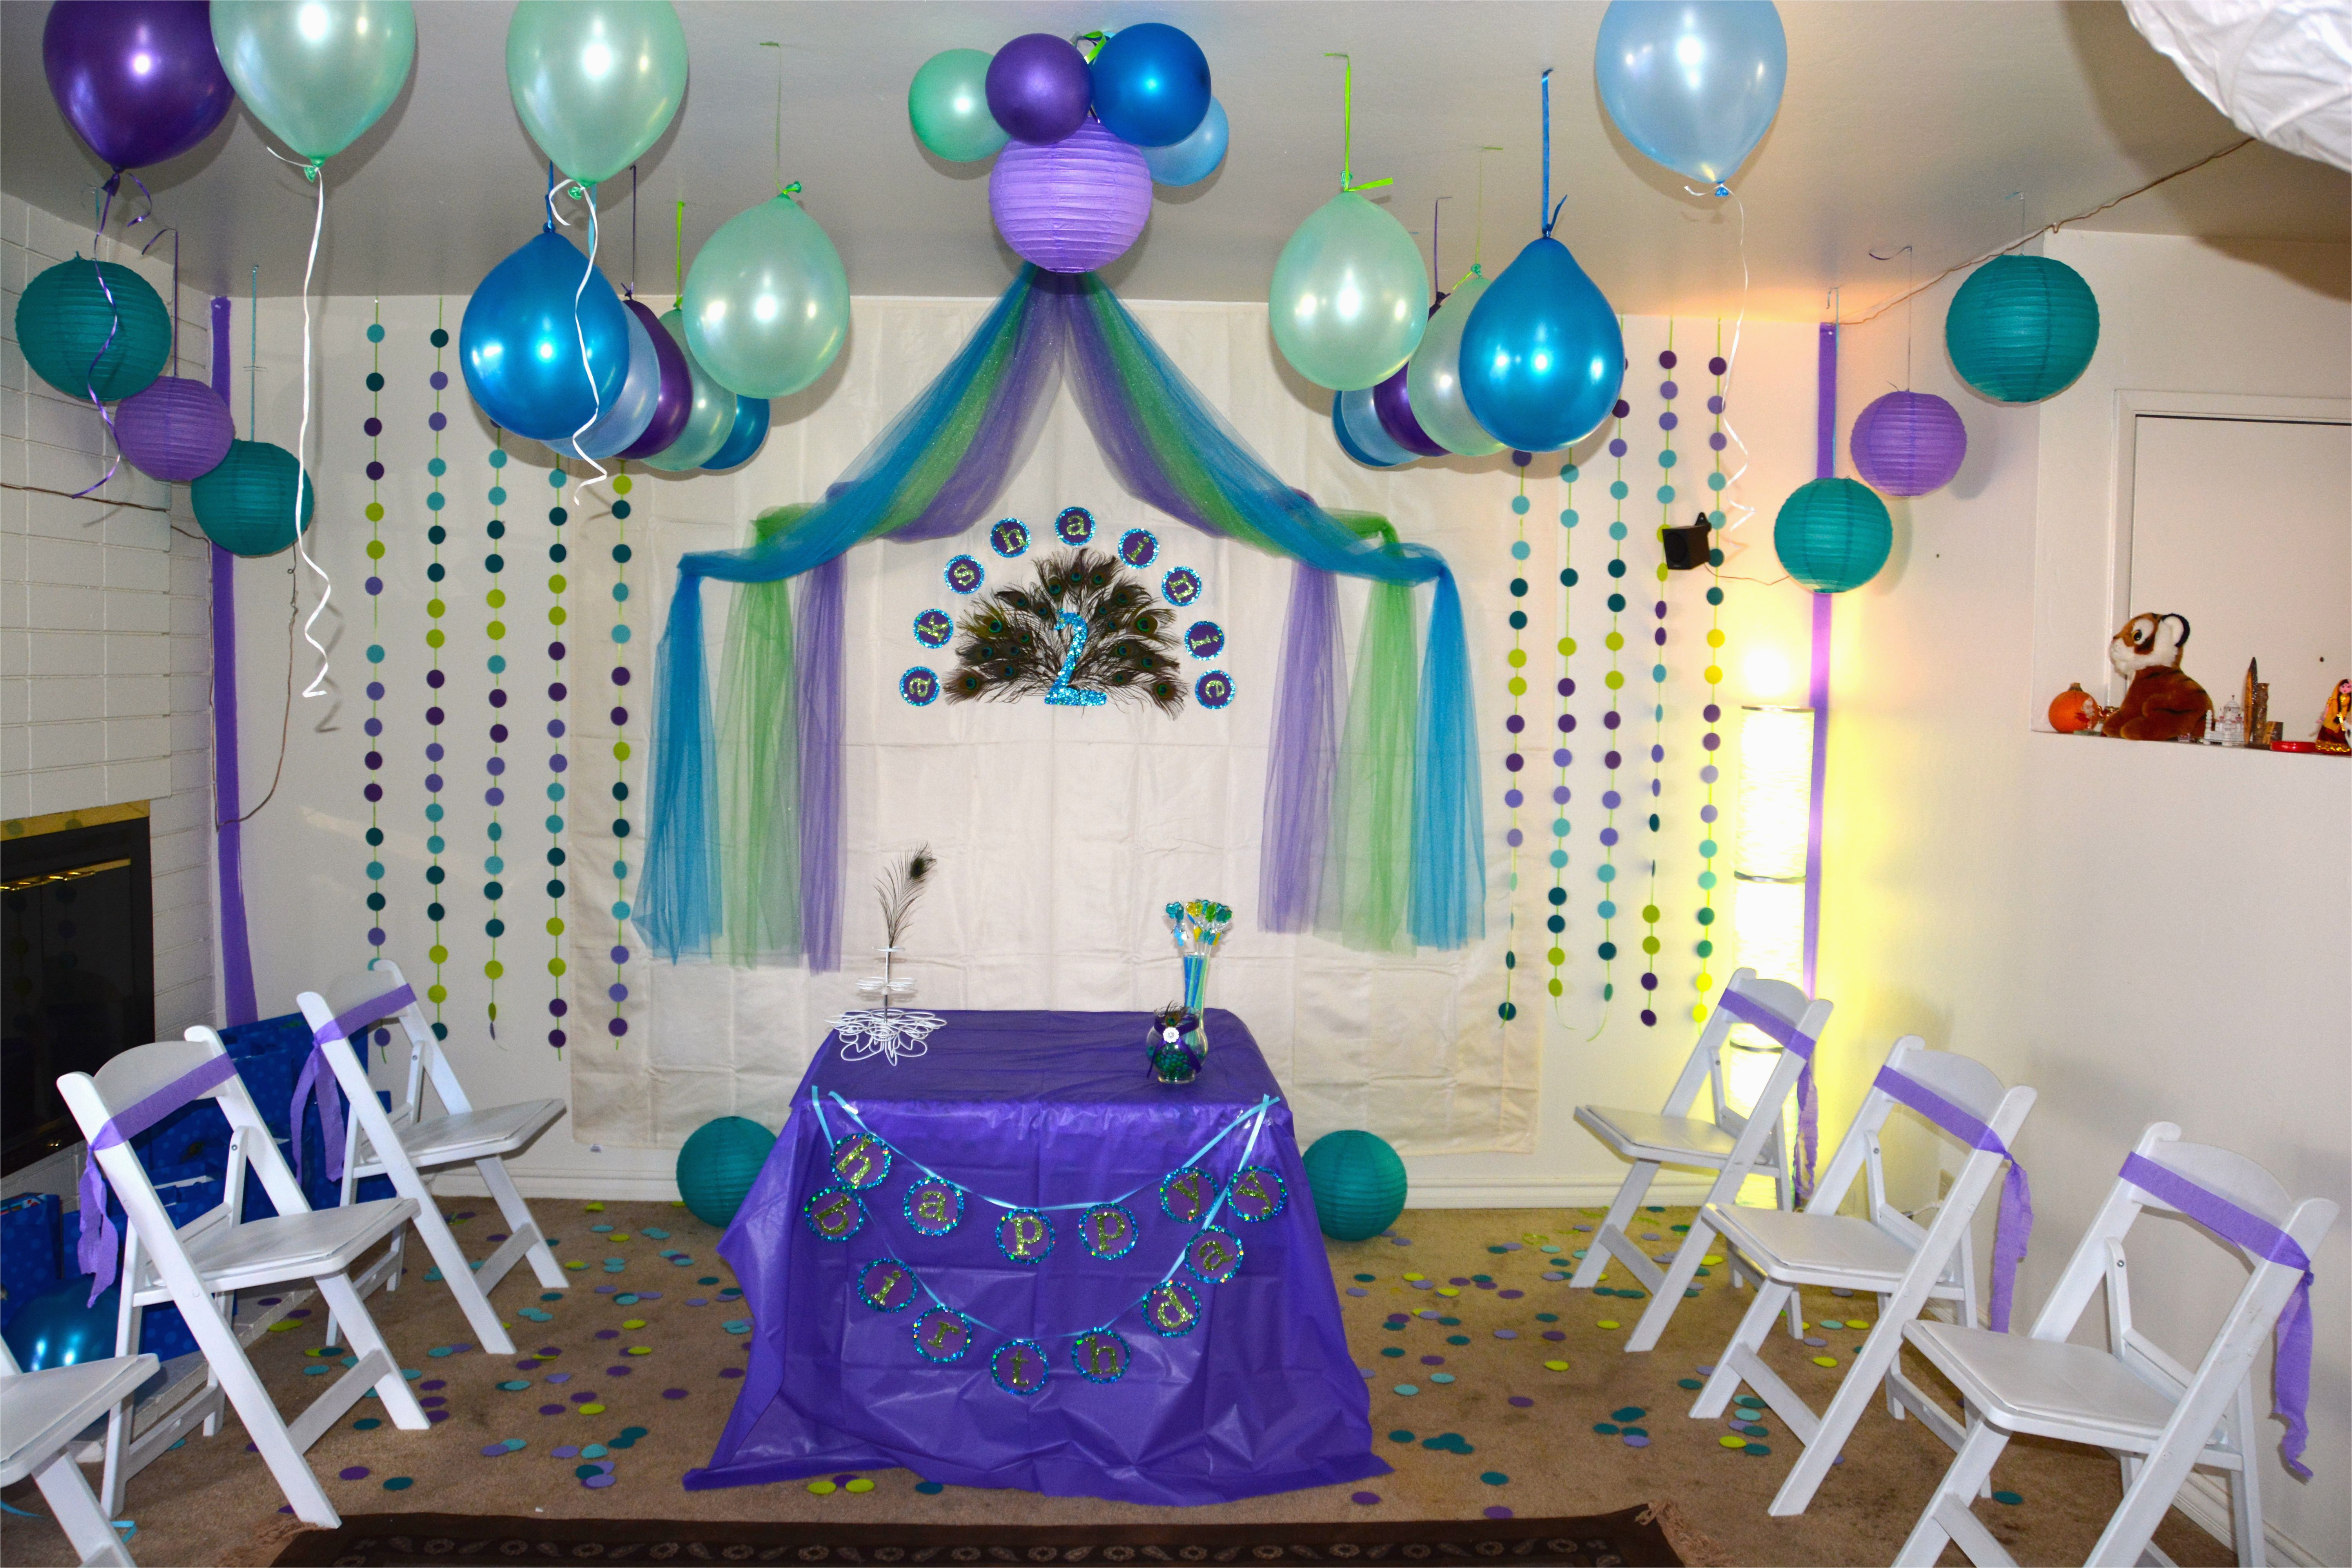 Peacock Birthday Party Decorations Peacock Birthday theme Peacock Birthday theme